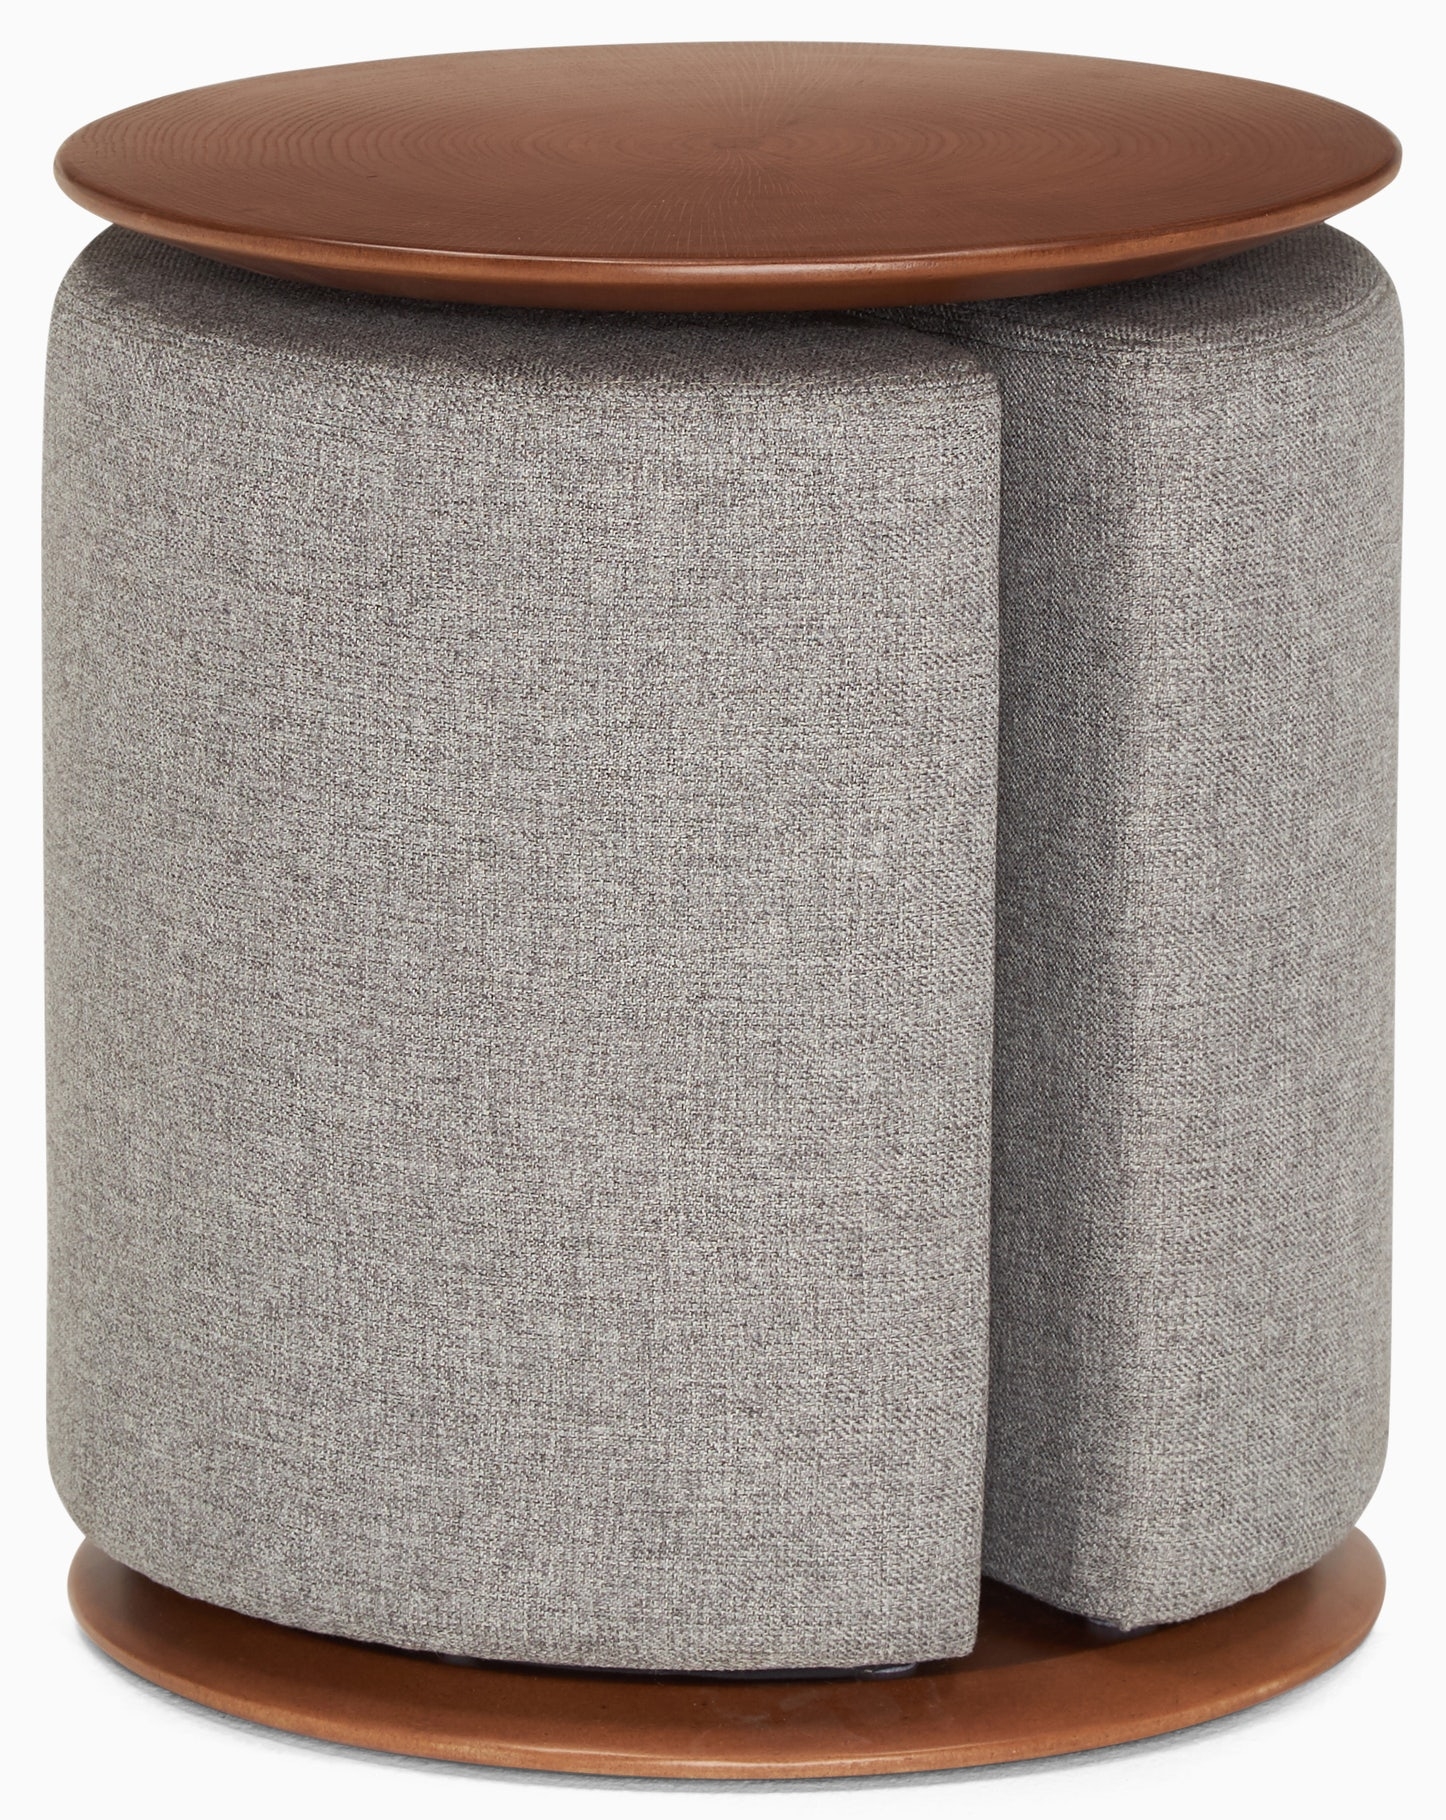 Darby Side Table - Image 1